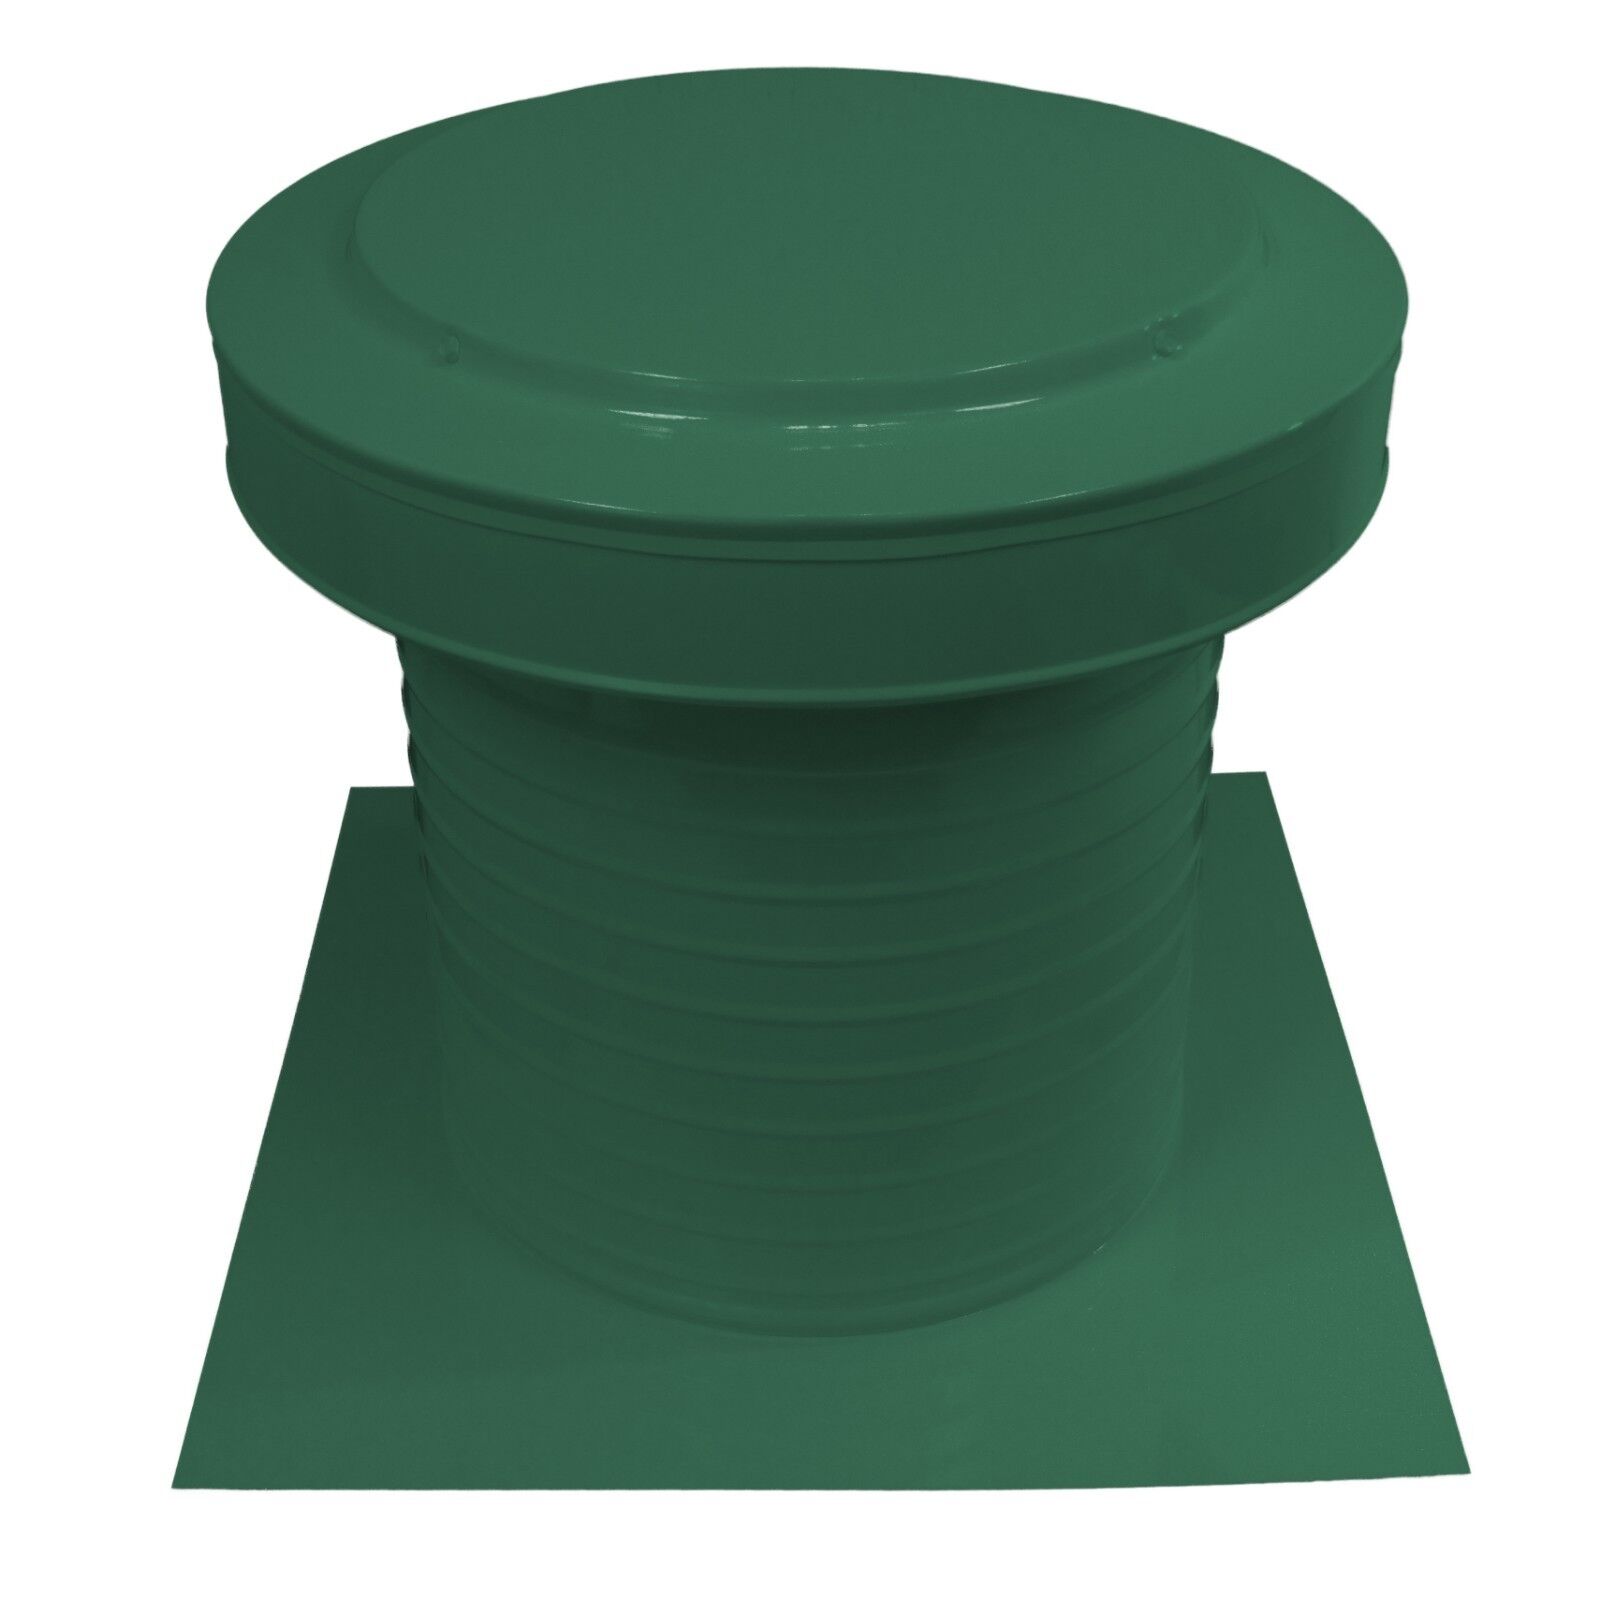 12 inch diameter Keepa Vent an Aluminum Roof Vent for Flat Roofs in Green